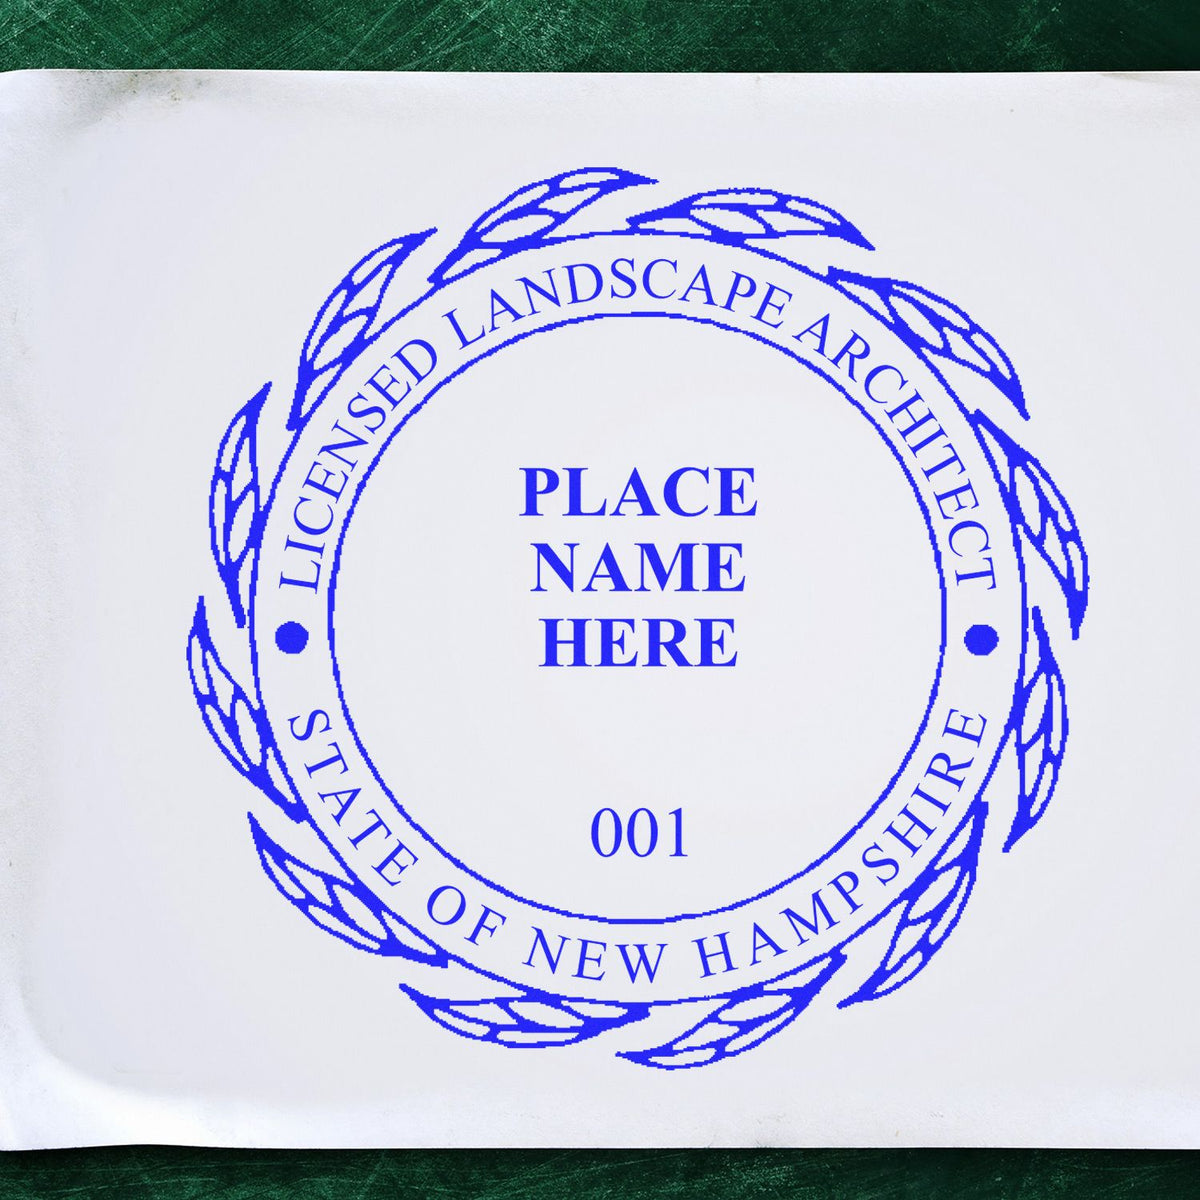 The Slim Pre-Inked New Hampshire Landscape Architect Seal Stamp stamp impression comes to life with a crisp, detailed photo on paper - showcasing true professional quality.